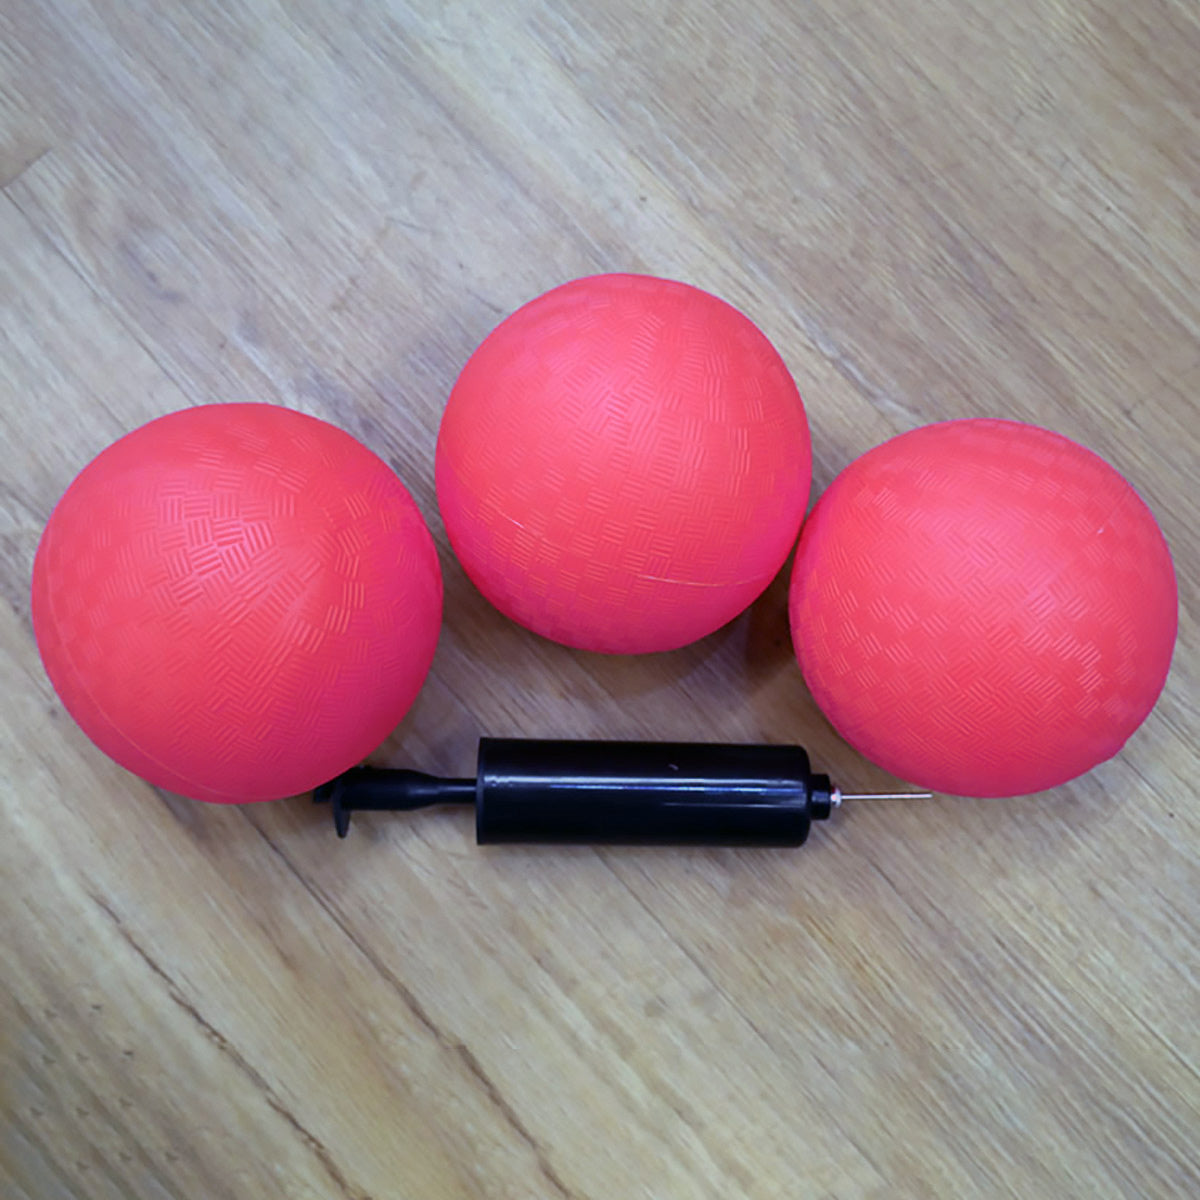 3 x 5 inflatable balls for Rocker Plates +  Free pump & needle